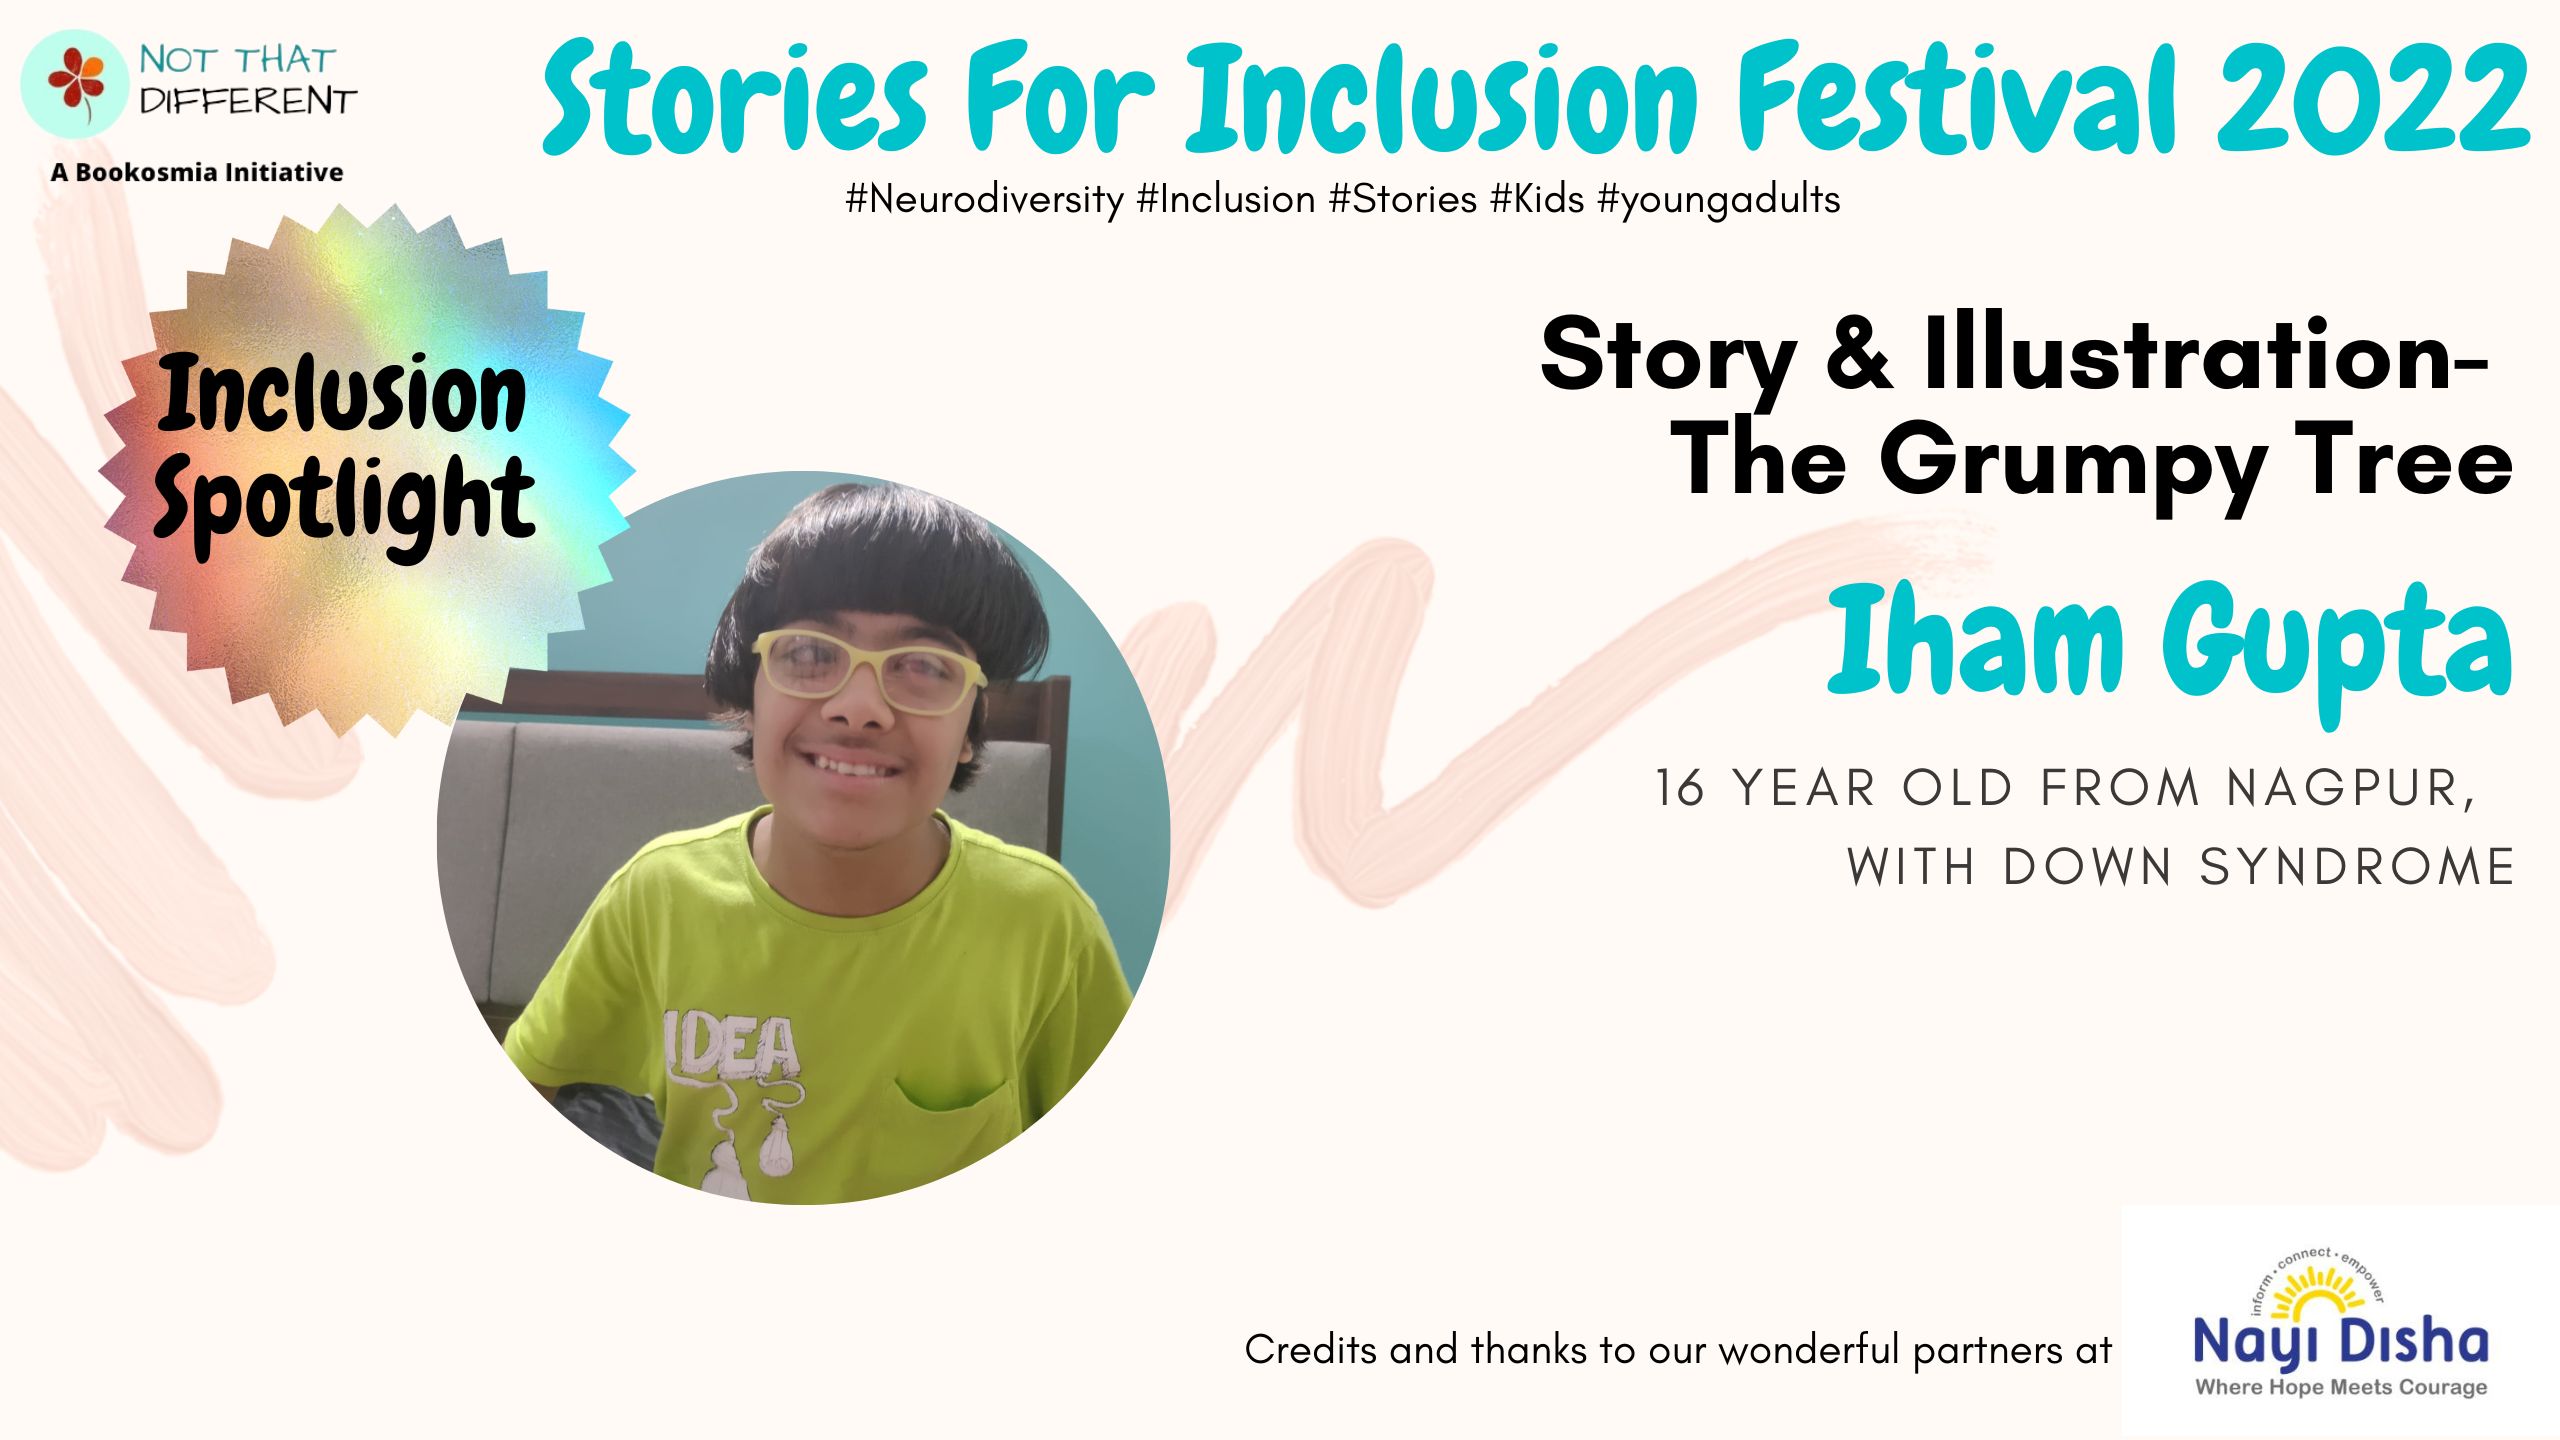 16 year old Iham Gupta from Nagpur, with Down Syndrome | Inclusion Fest Storyteller Spotlight